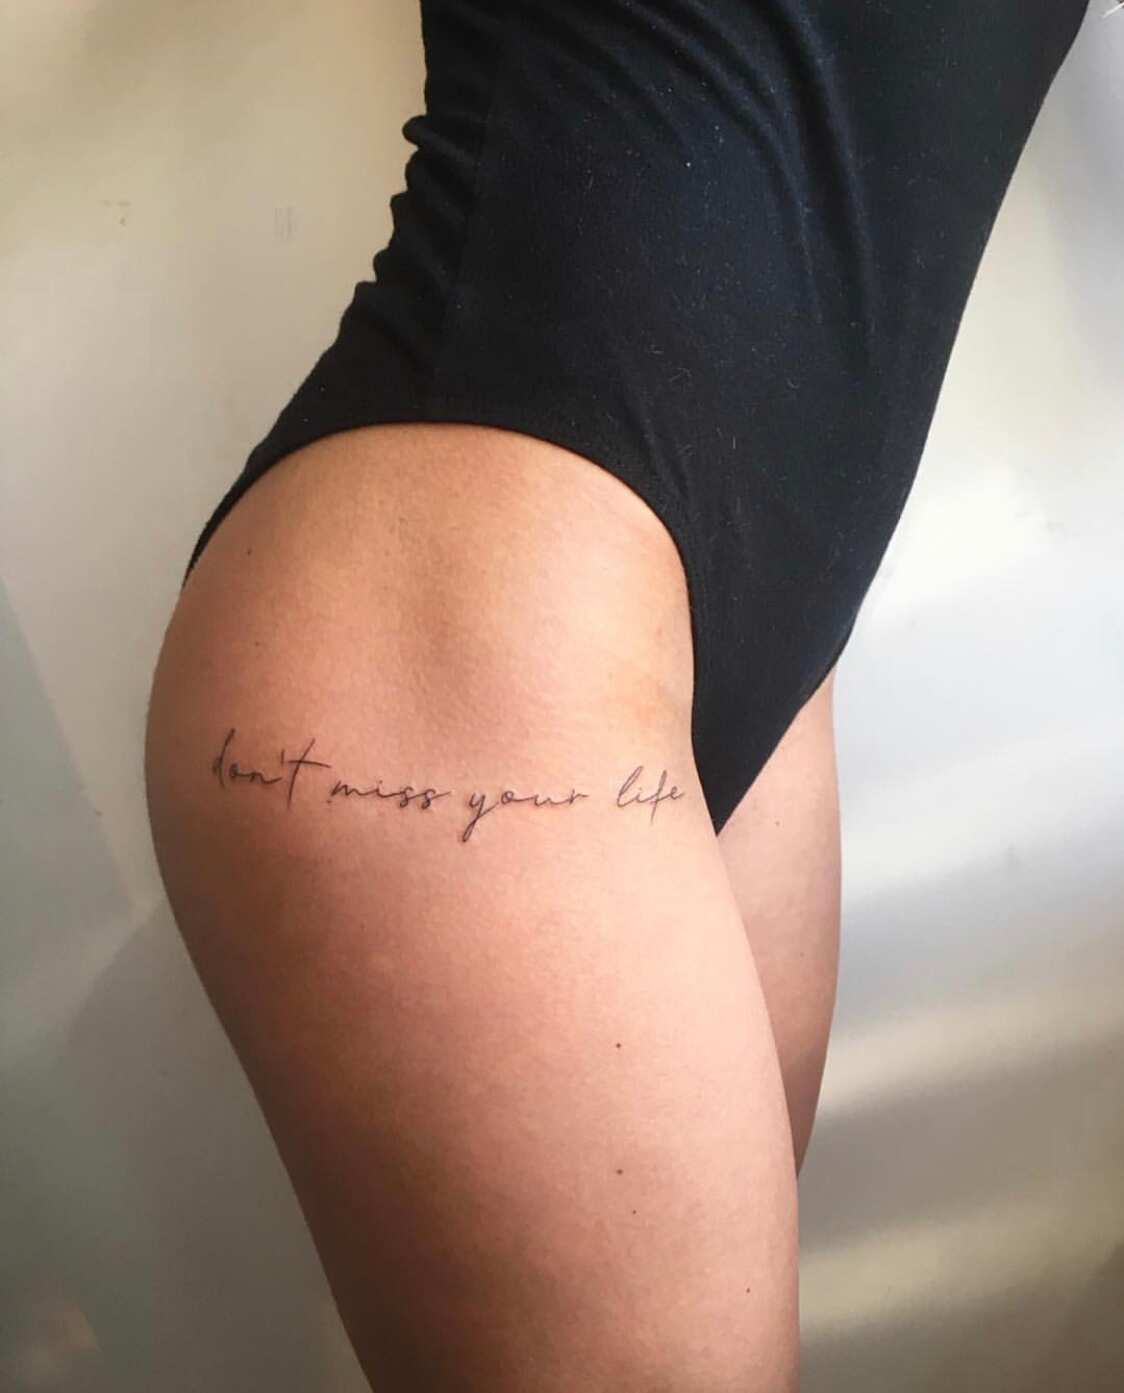 Tattoo tagged with: black, boa sorte, font, languages, little, matching,  numi, portuguese tattoo quotes, portuguese, script, small, lettering, quotes,  thigh, tiny | inked-app.com